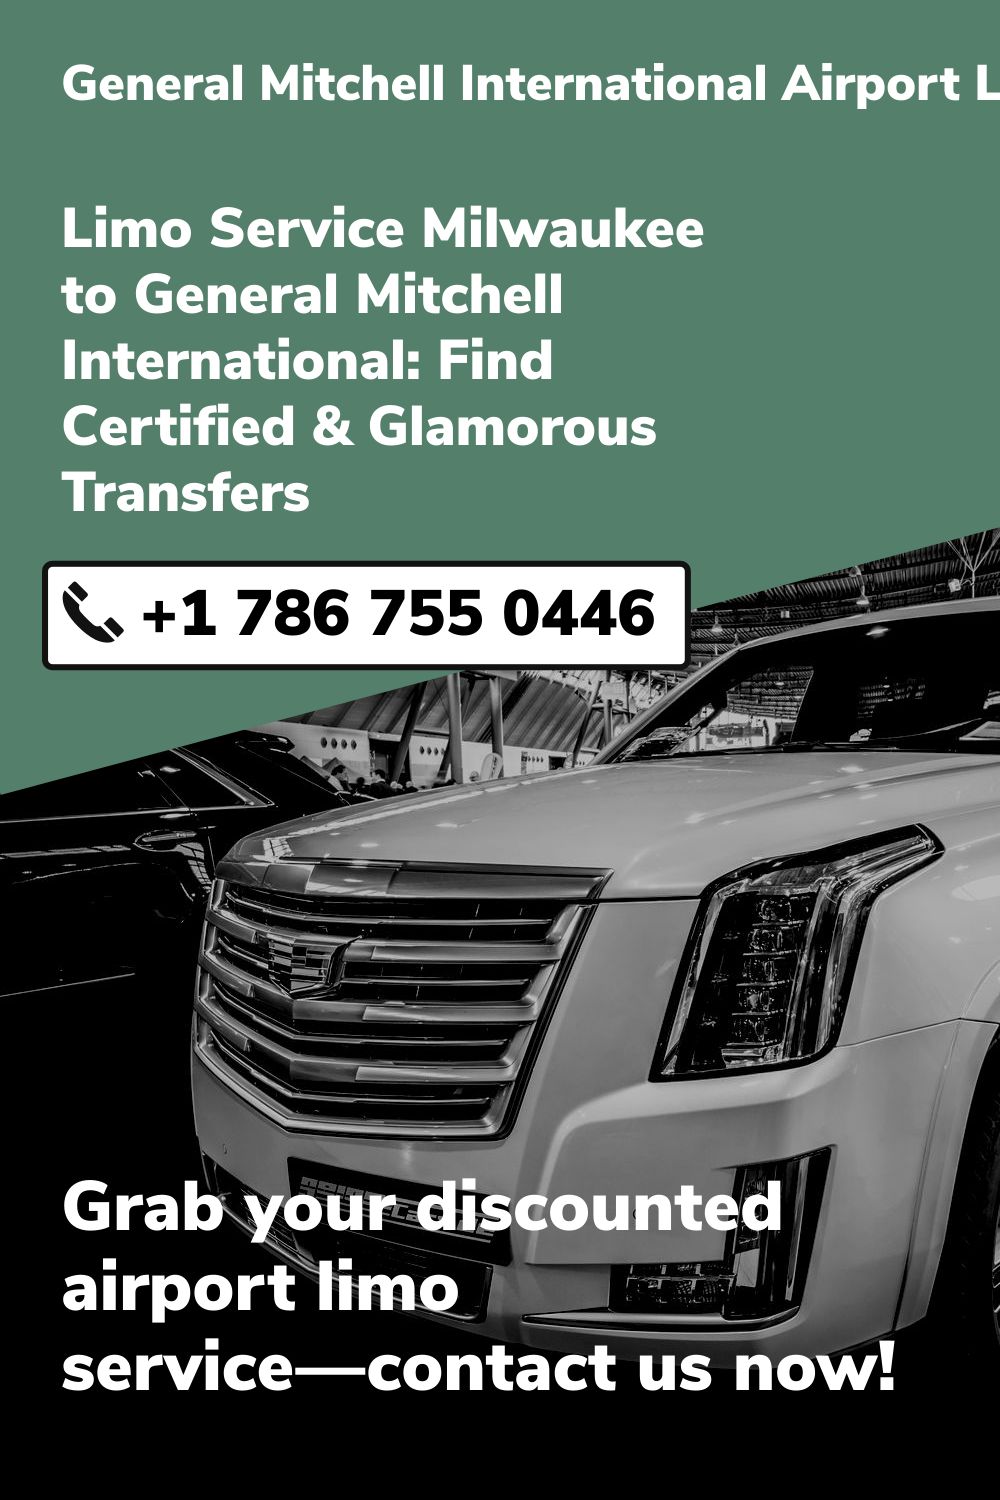 General Mitchell International Airport Limo